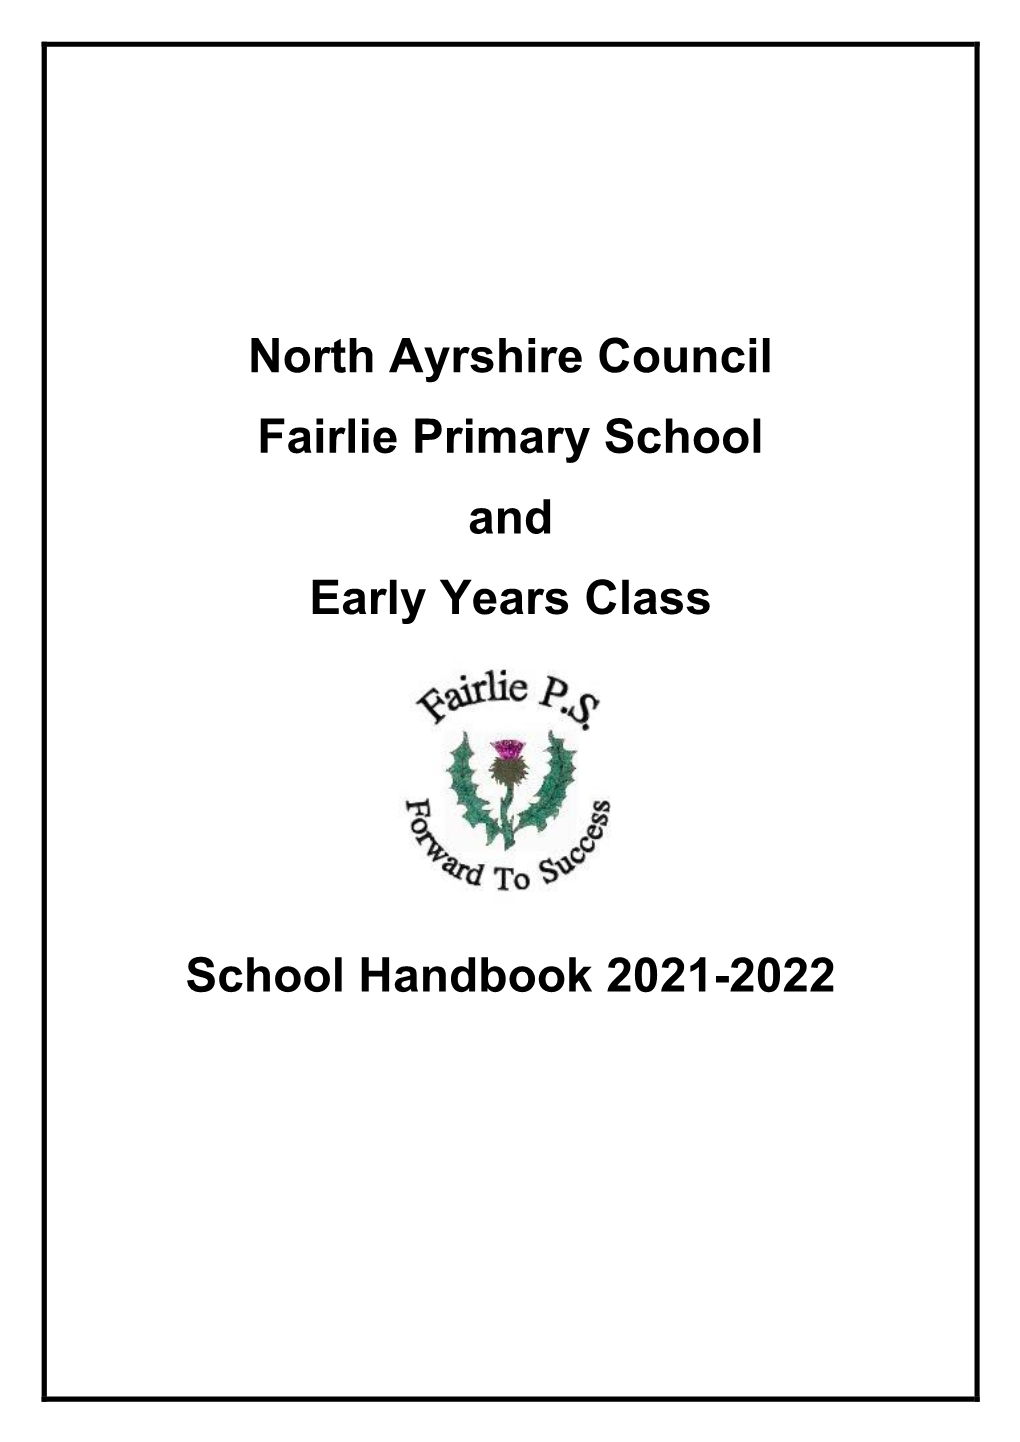 North Ayrshire Council Fairlie Primary School and Early Years Class